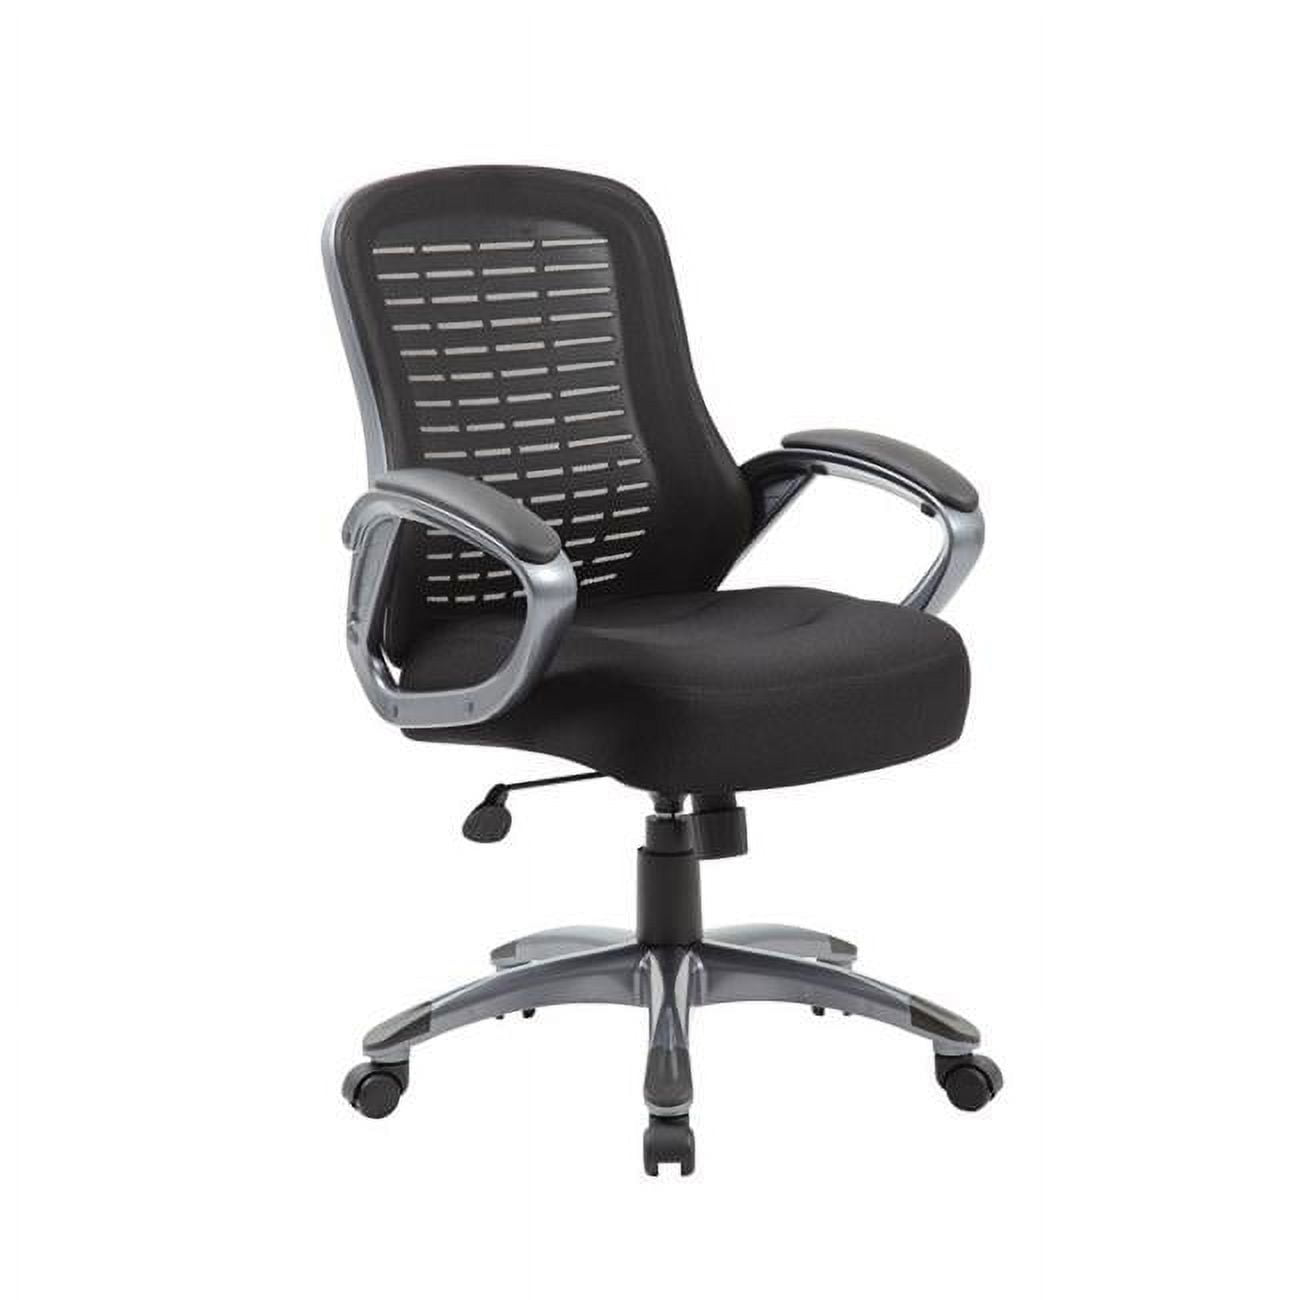 Picture of Norstar B6756-BK Mesh Back Chair with Mesh Arm Pad, Gun Metal Arm & Base